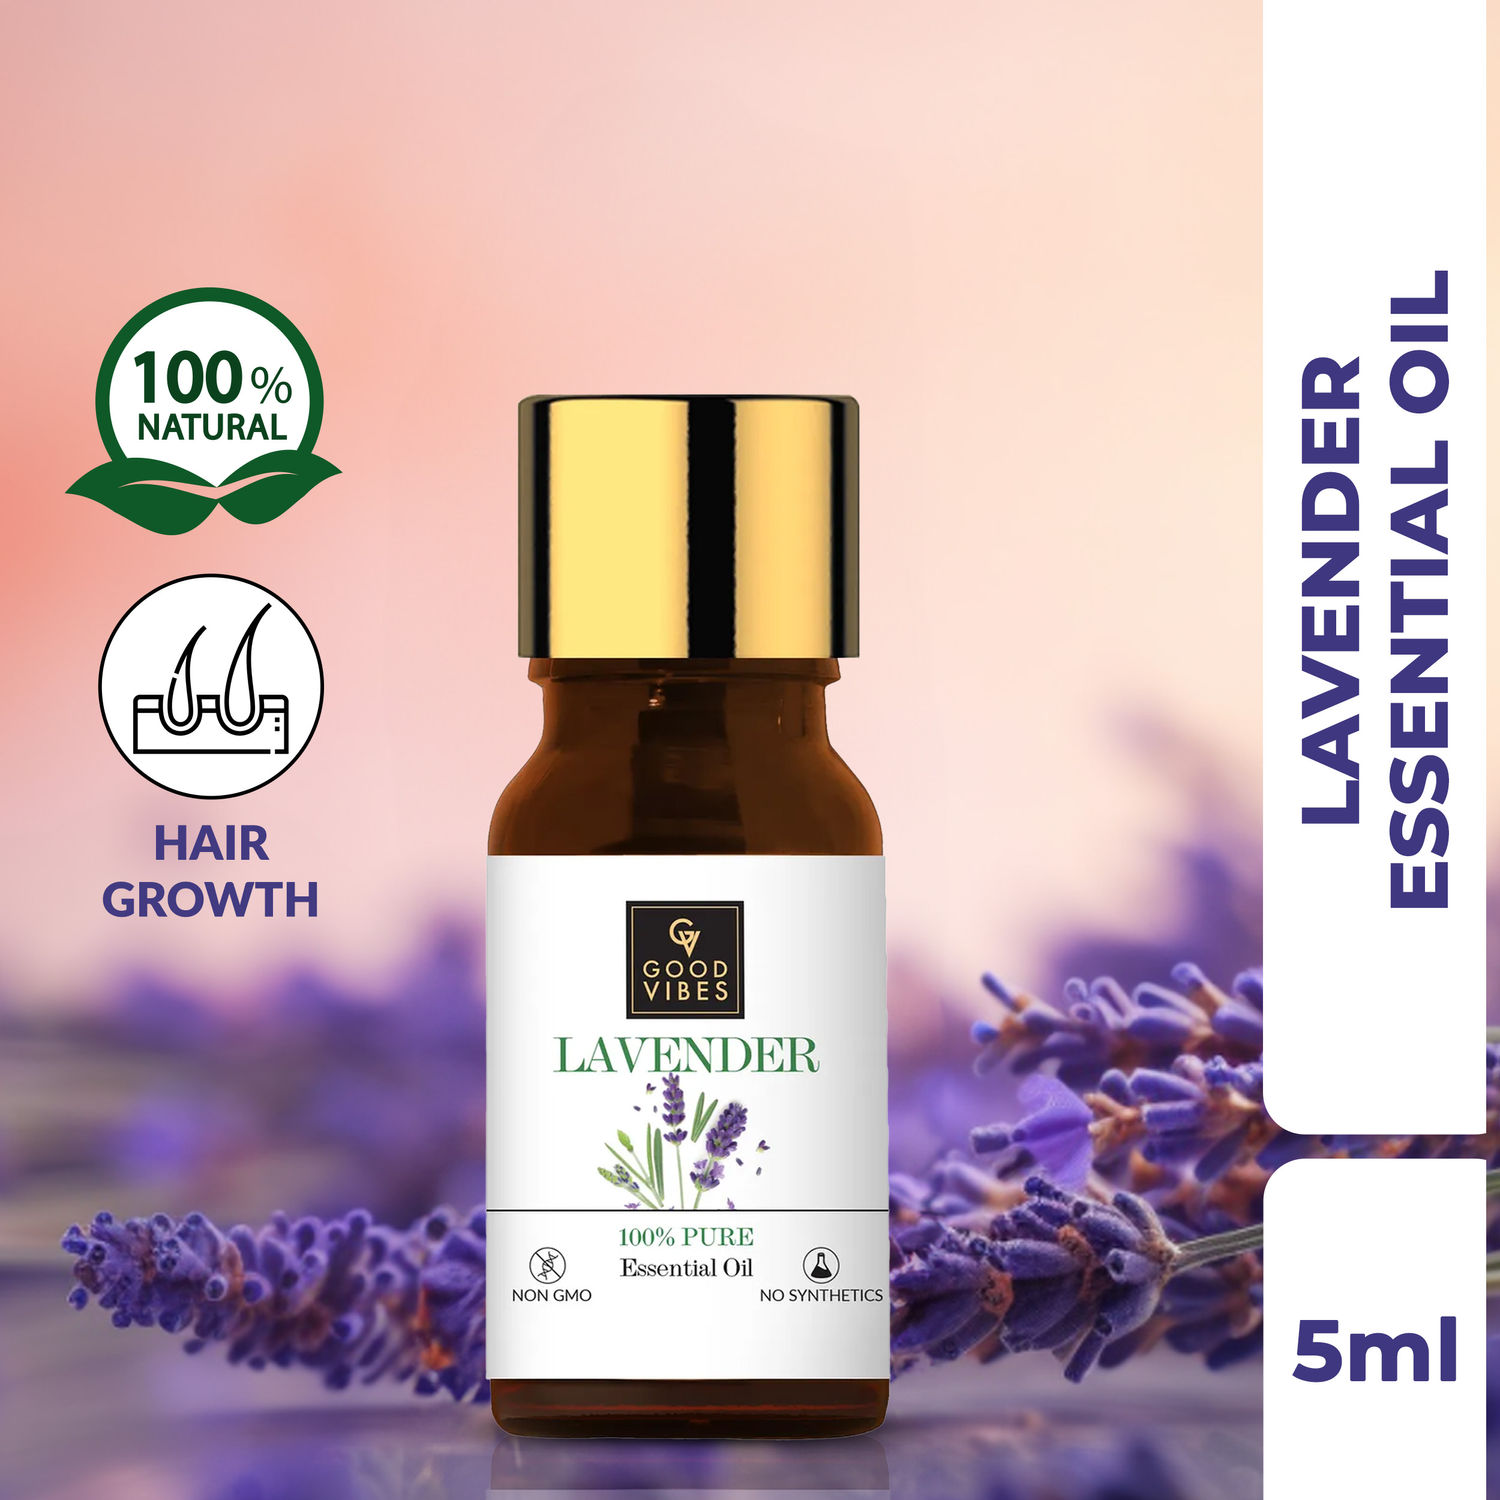 Buy Good Vibes Lavender 100% Pure Essential Oil | Skin Smoothening, Hair Growth | 100% Vegetarian, No GMO, No Synthetics, No Animal Testing (5 ml) - Purplle